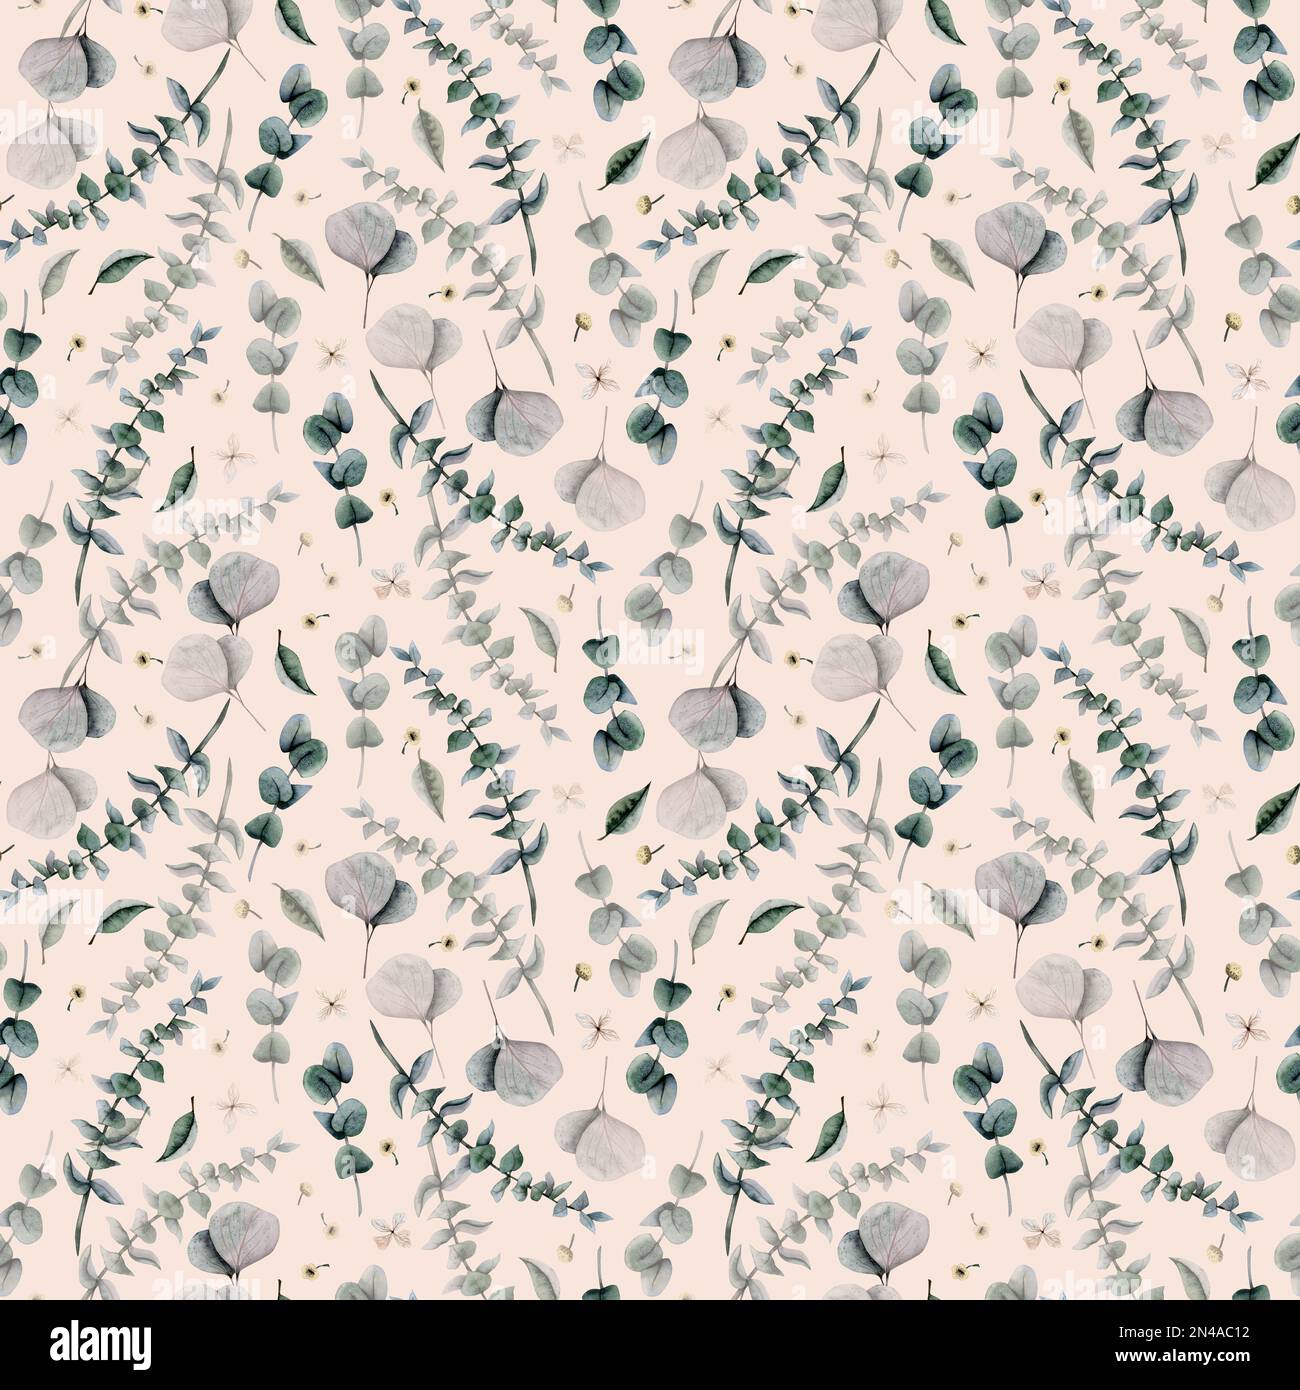 Watercolor eucalyptus silver dollar branches, leaves, foliage seamless pattern on light beige background. Stock Photo